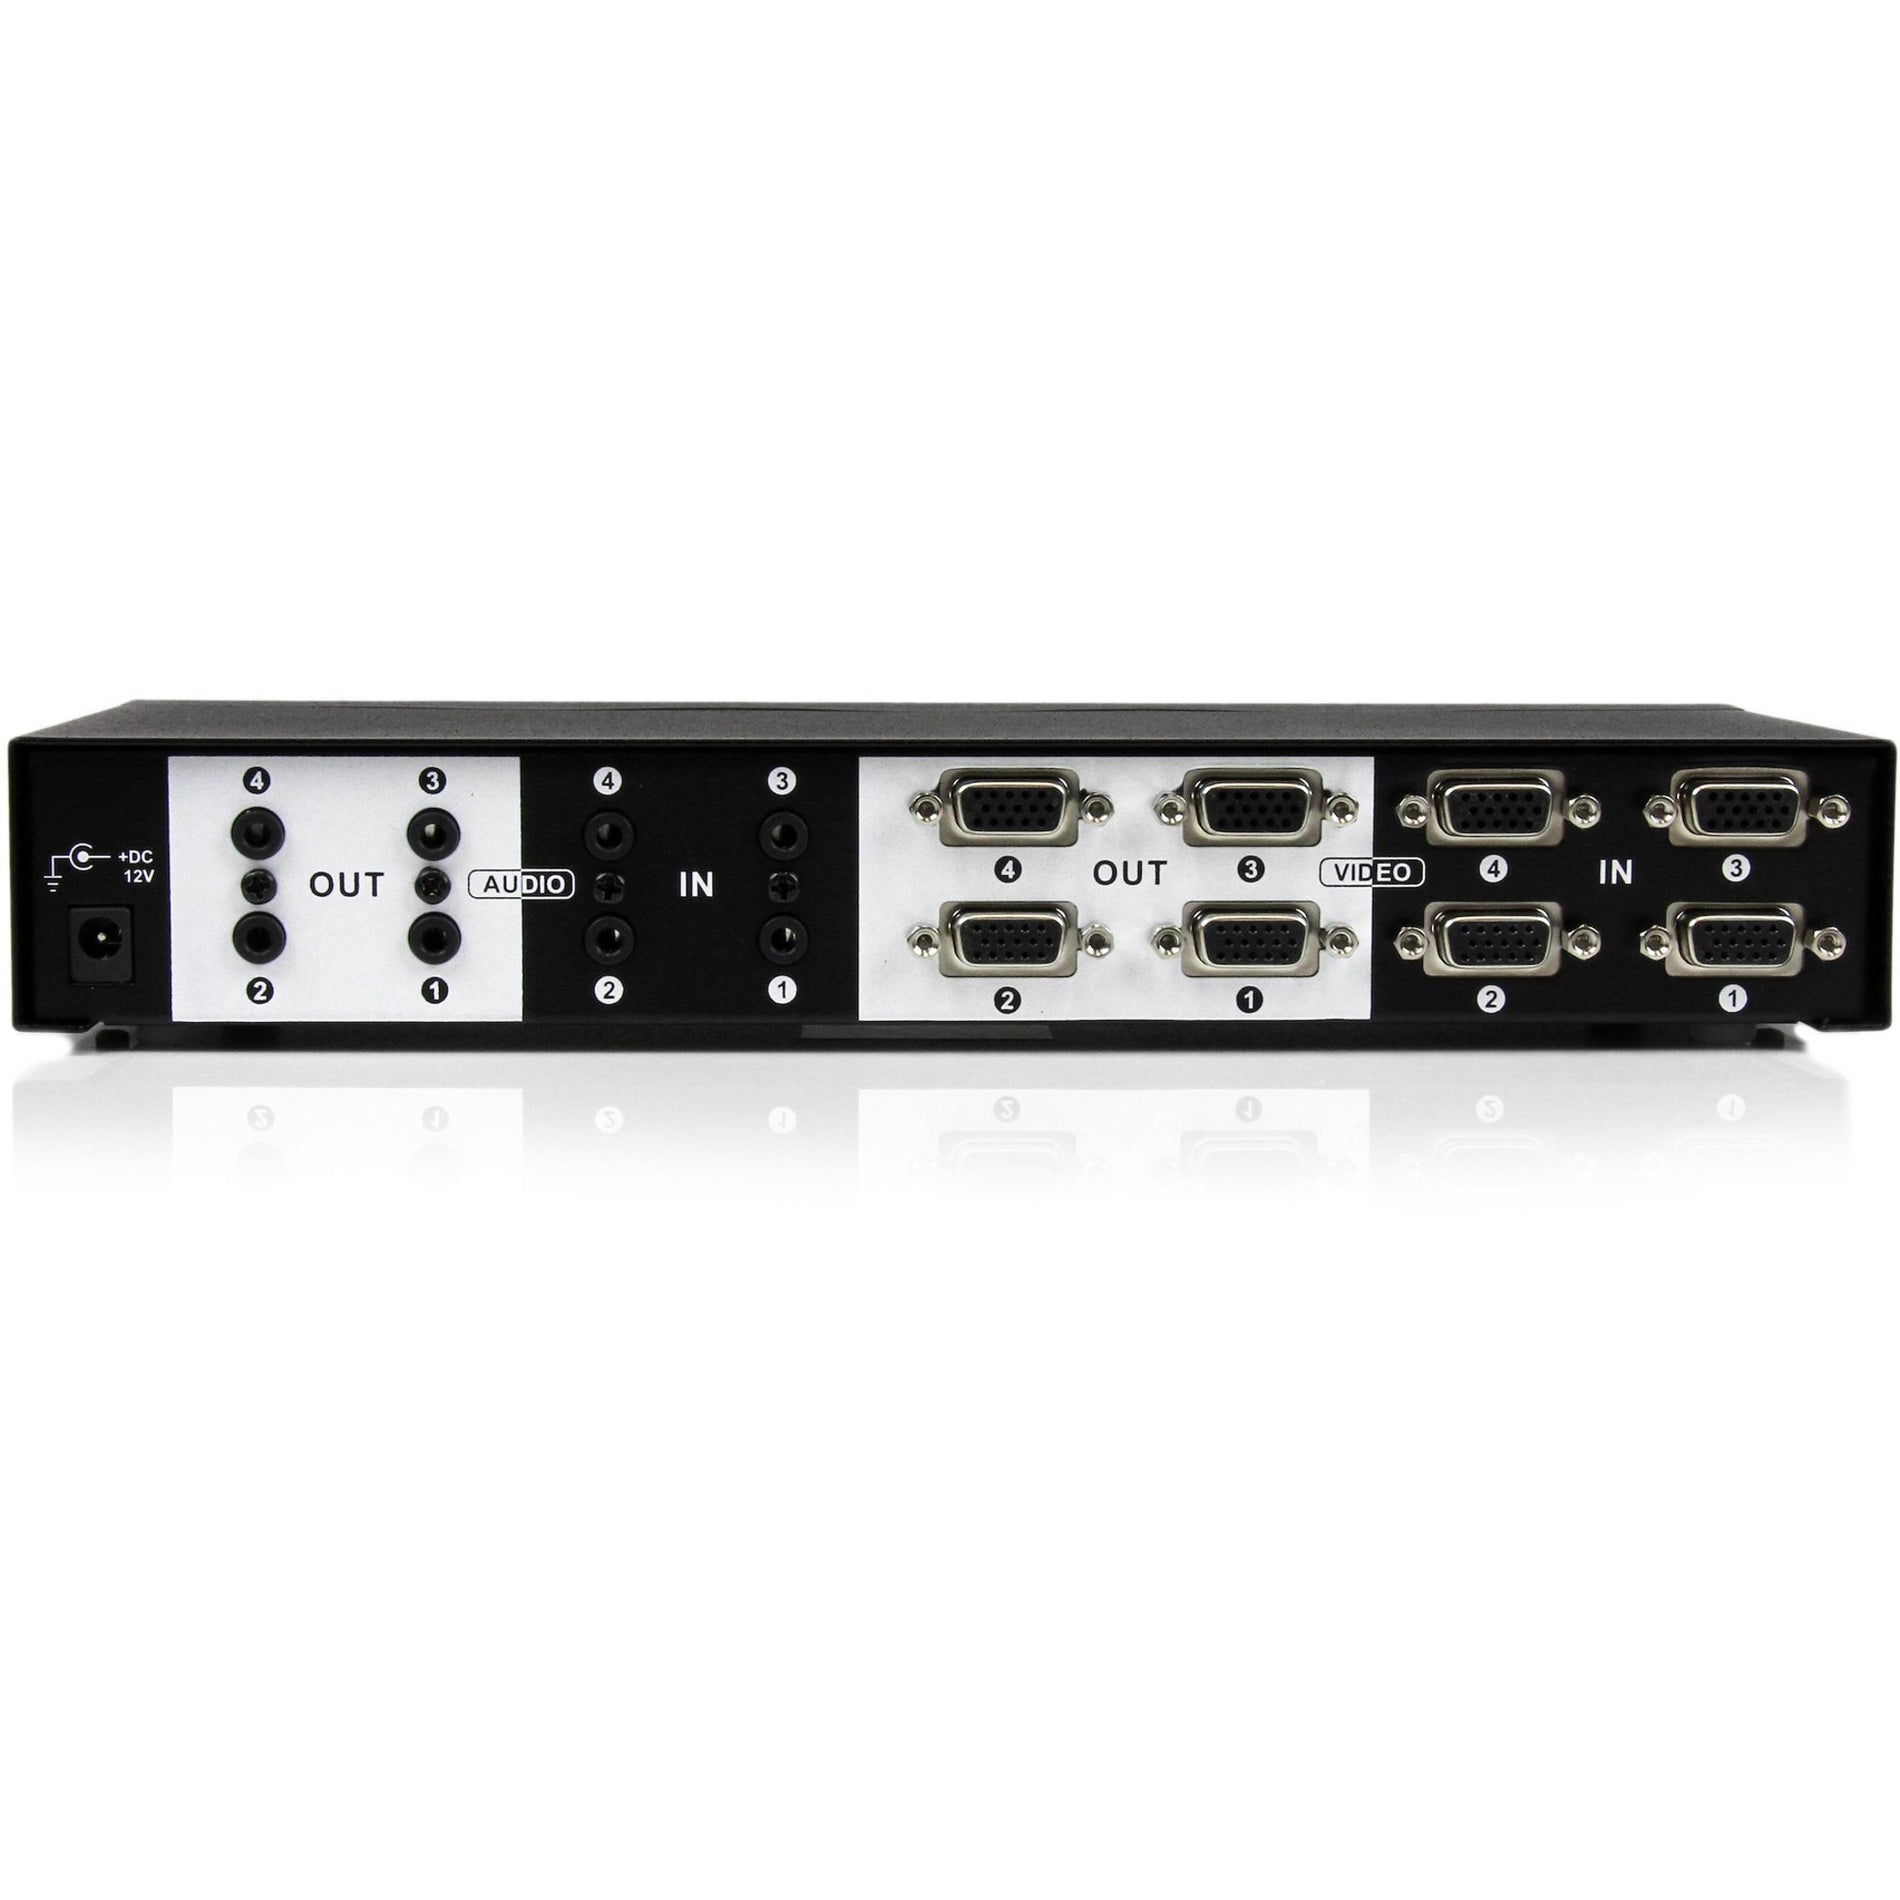 StarTech.com ST424MX 4x4 VGA Video Matrix Switch Splitter with Audio, Full Control, Extended Connection